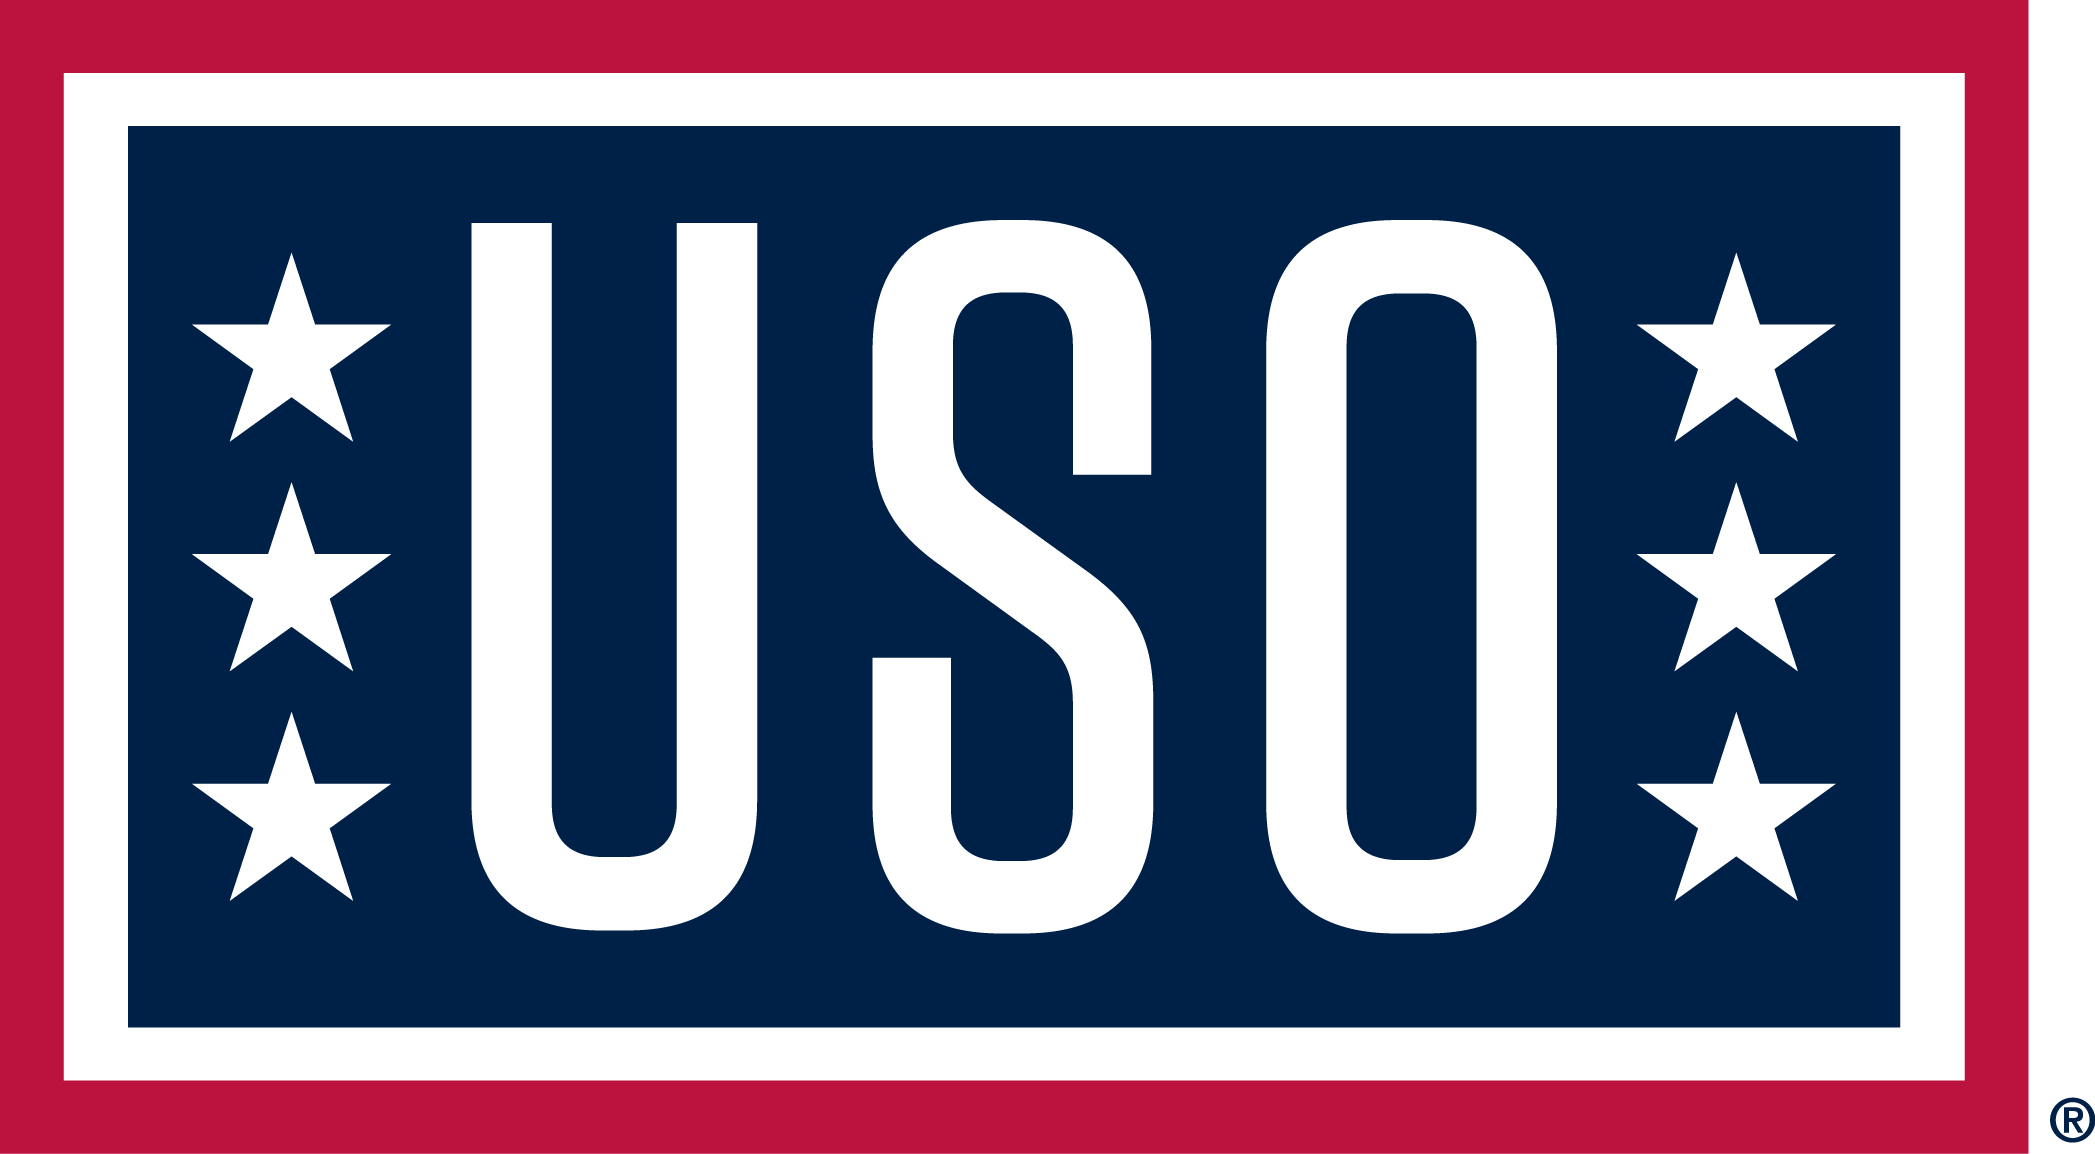 USO challenge coins